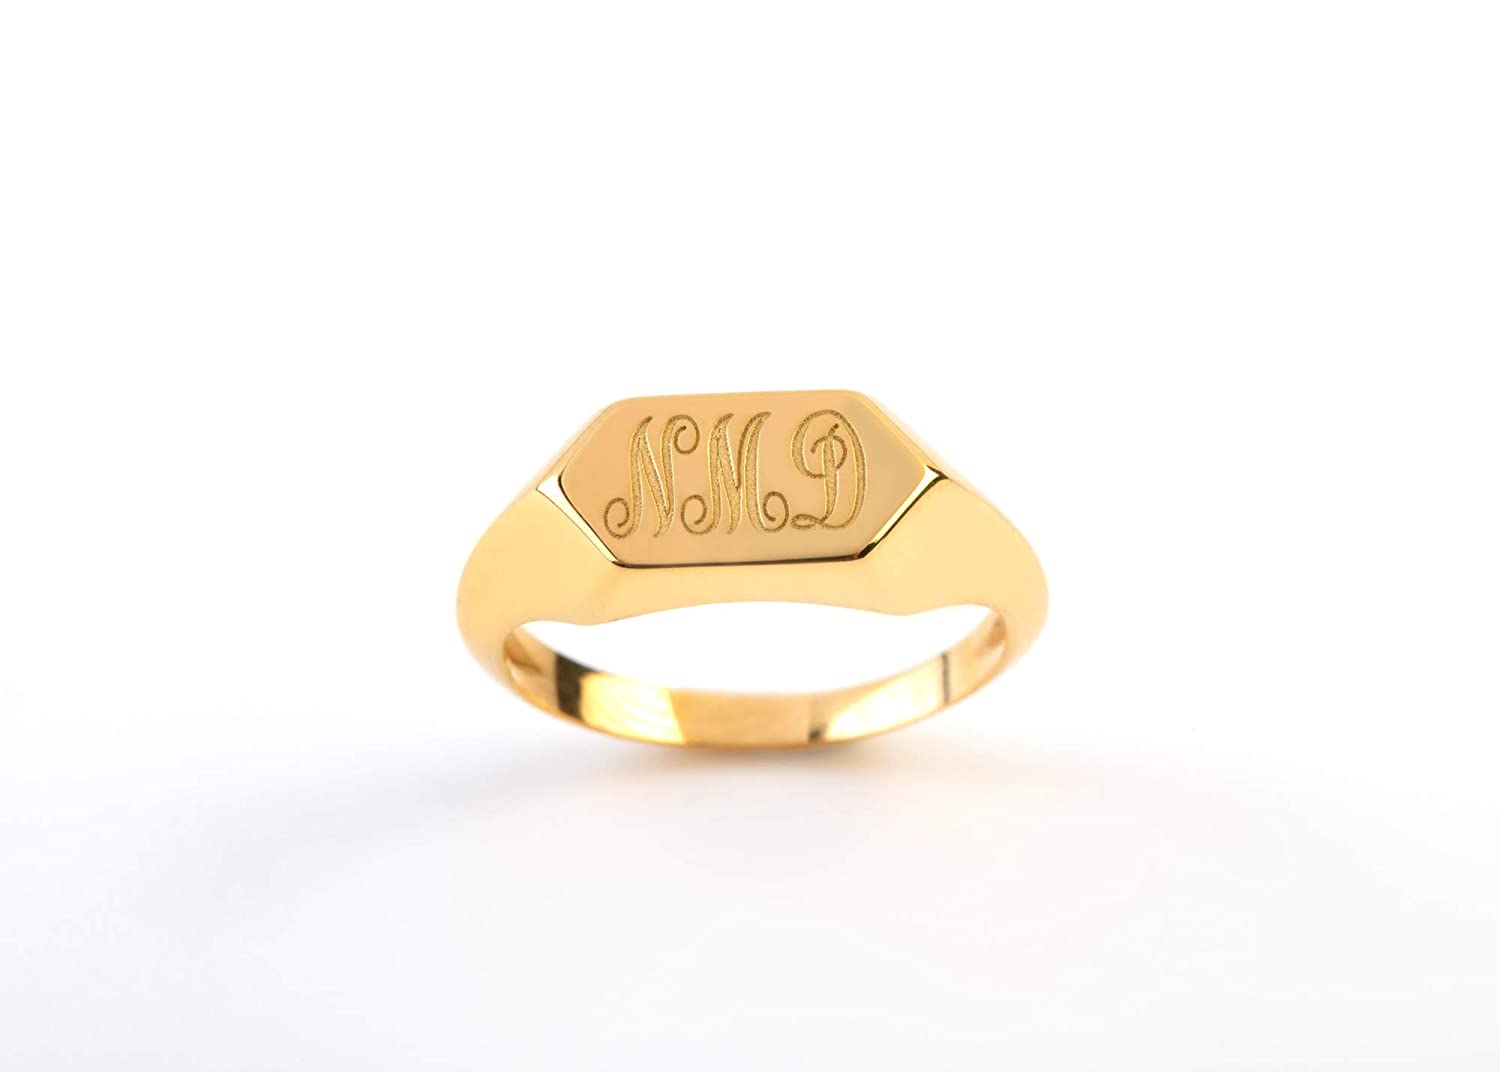 Large heavy antique signet ring from 1910 – The Antique Ring Shop